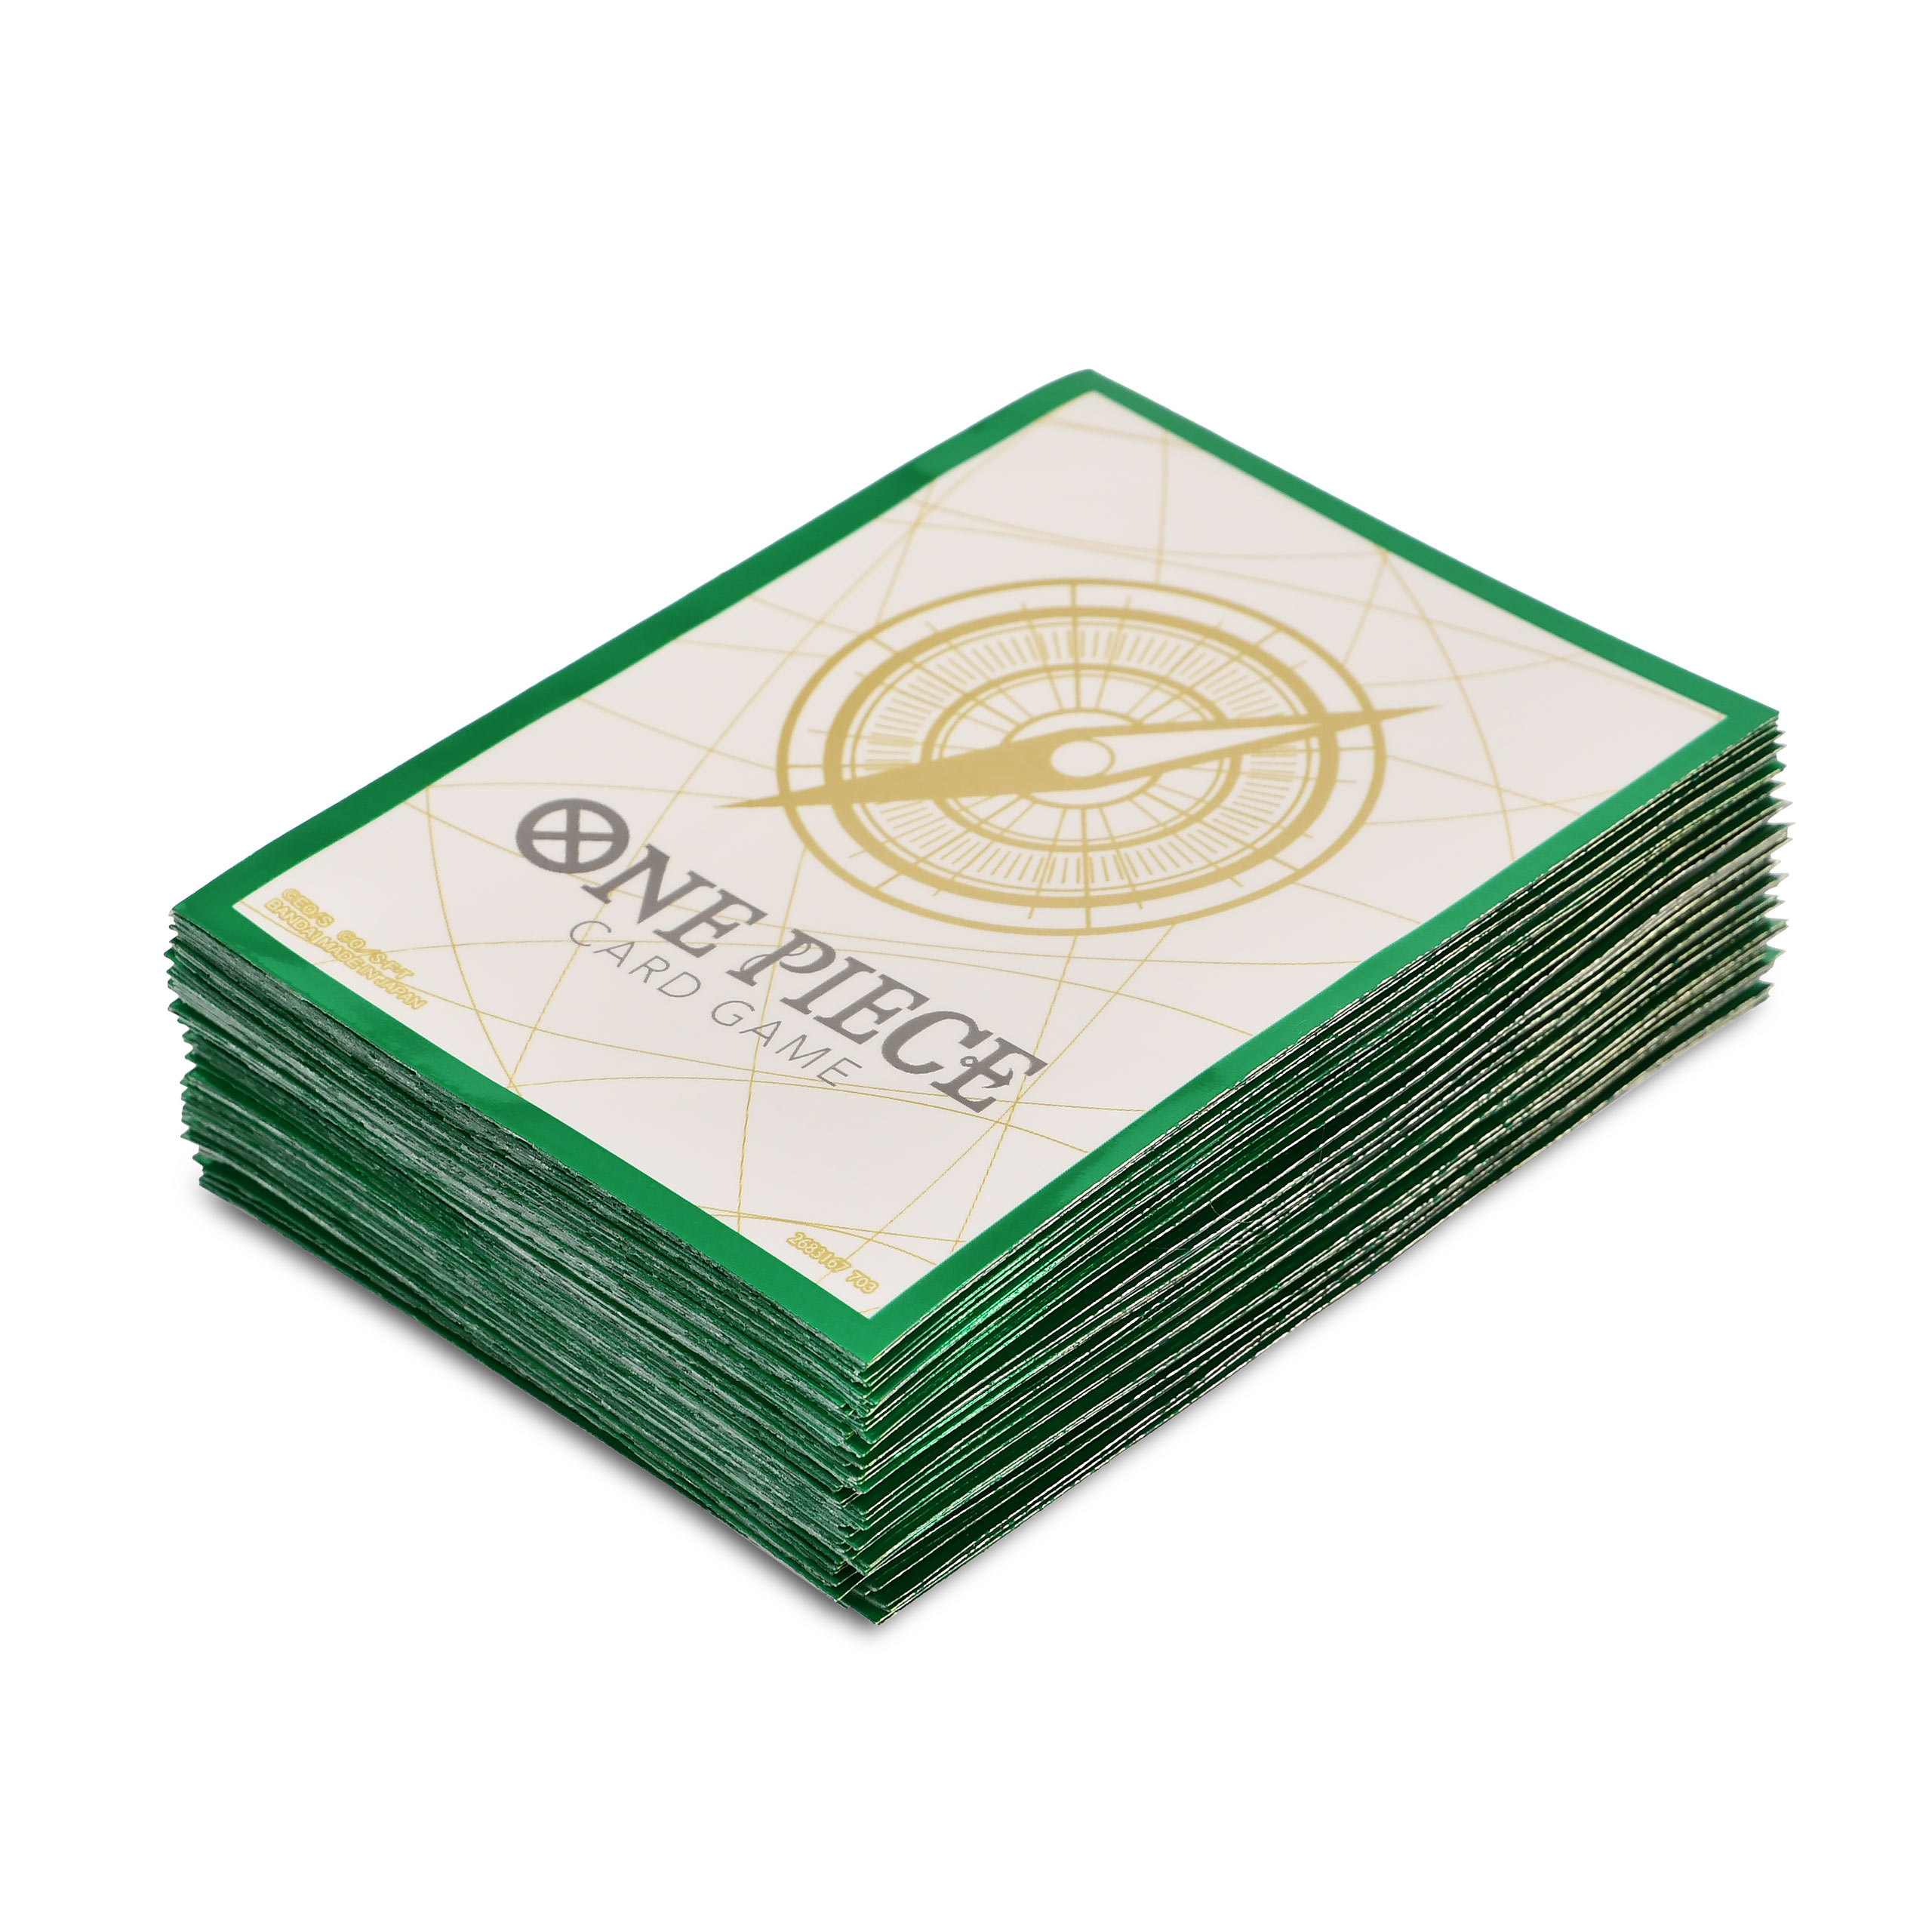 One Piece Card Game - Green Border Card Sleeves